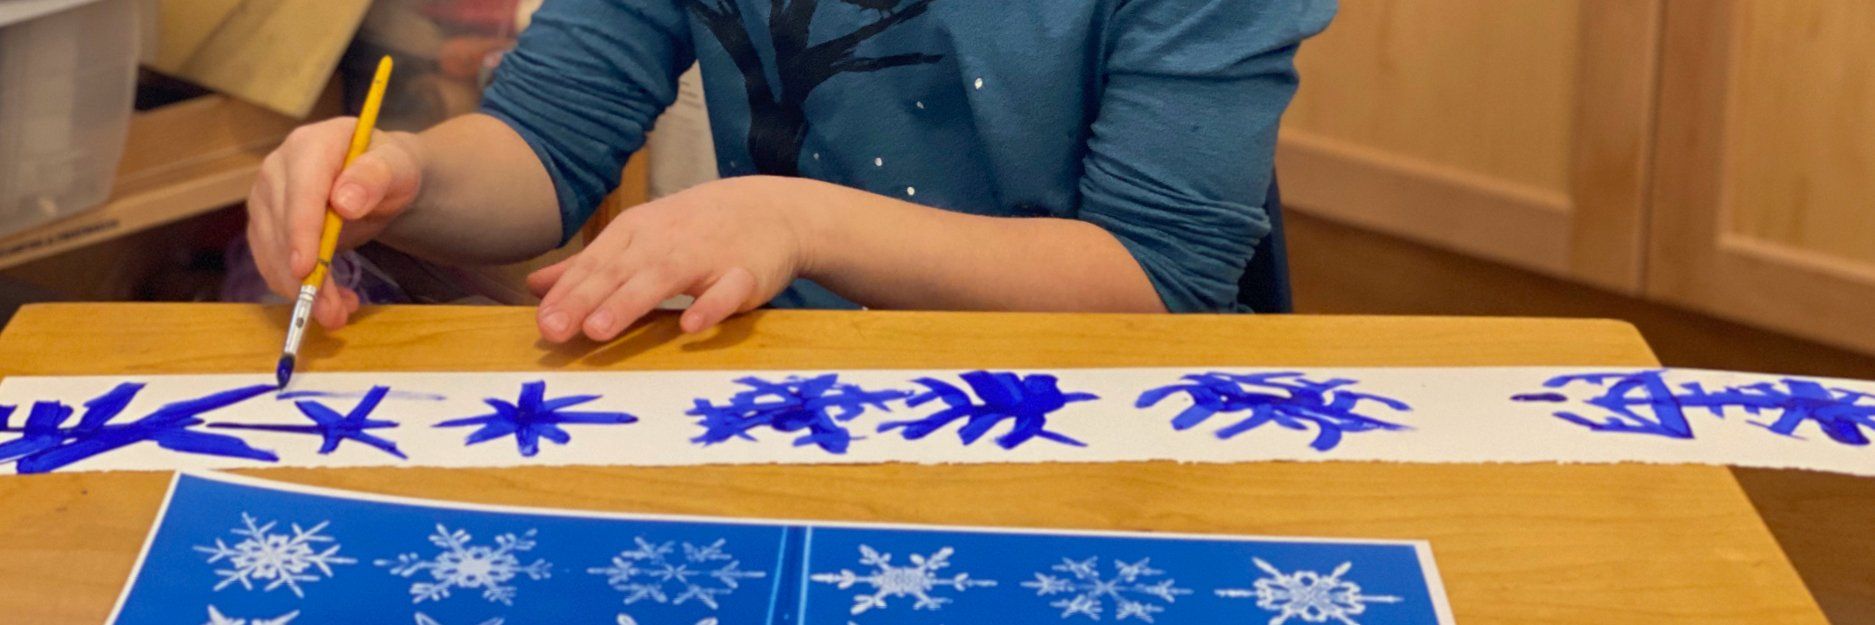 Child at table looking at and painting images of snowflakes